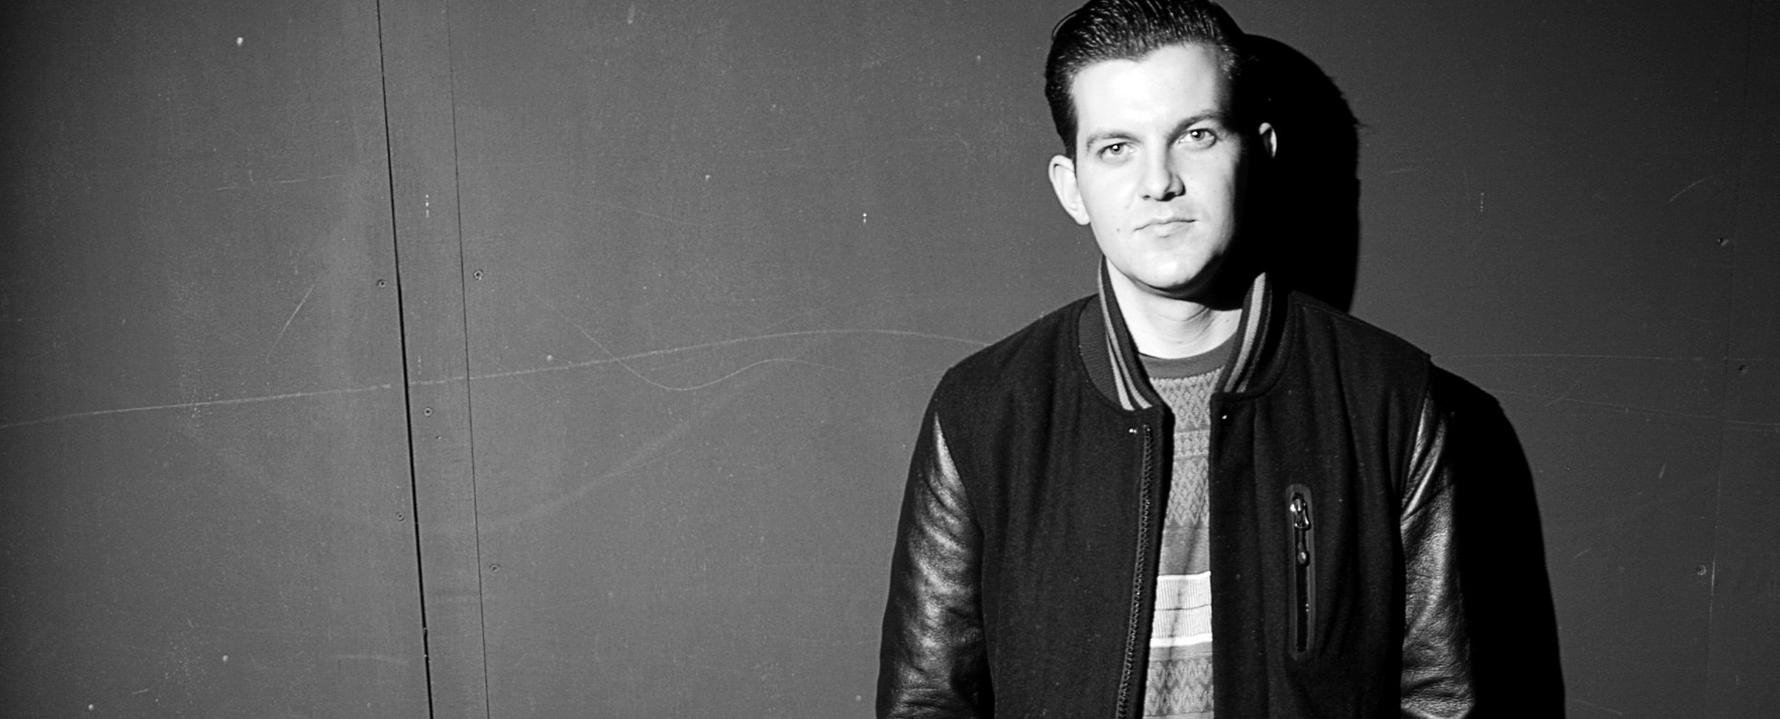 Promotional photograph of Dillon Francis.